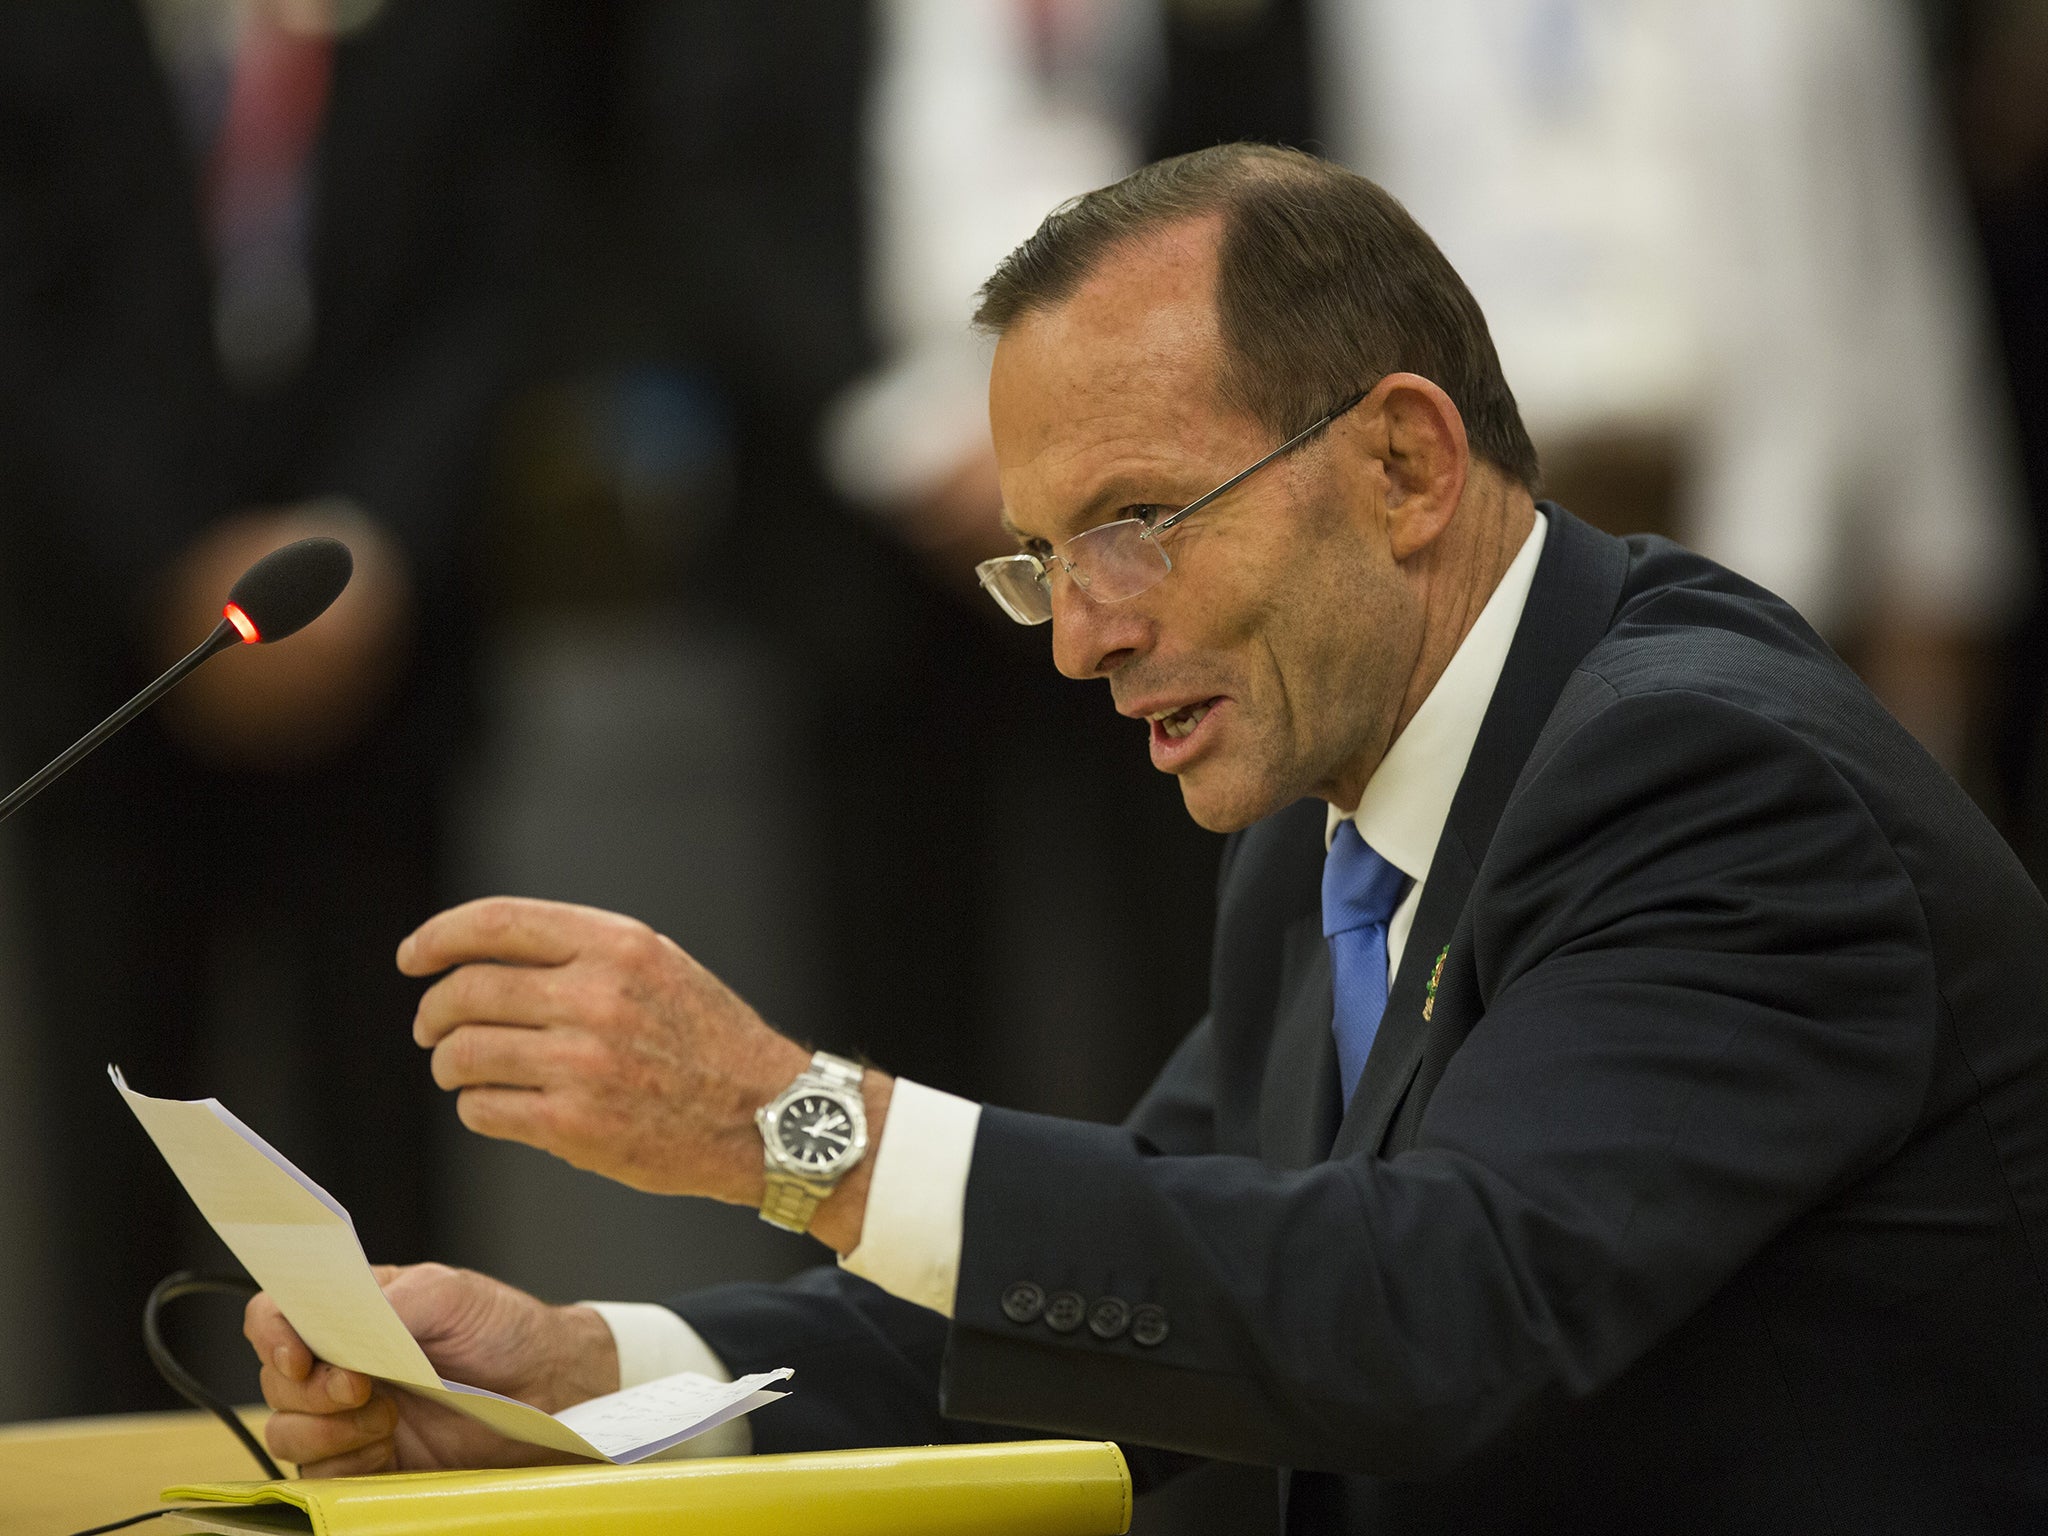 Tony Abbott has scrapped a carbon tax and is trying to reduce renewable energy targets